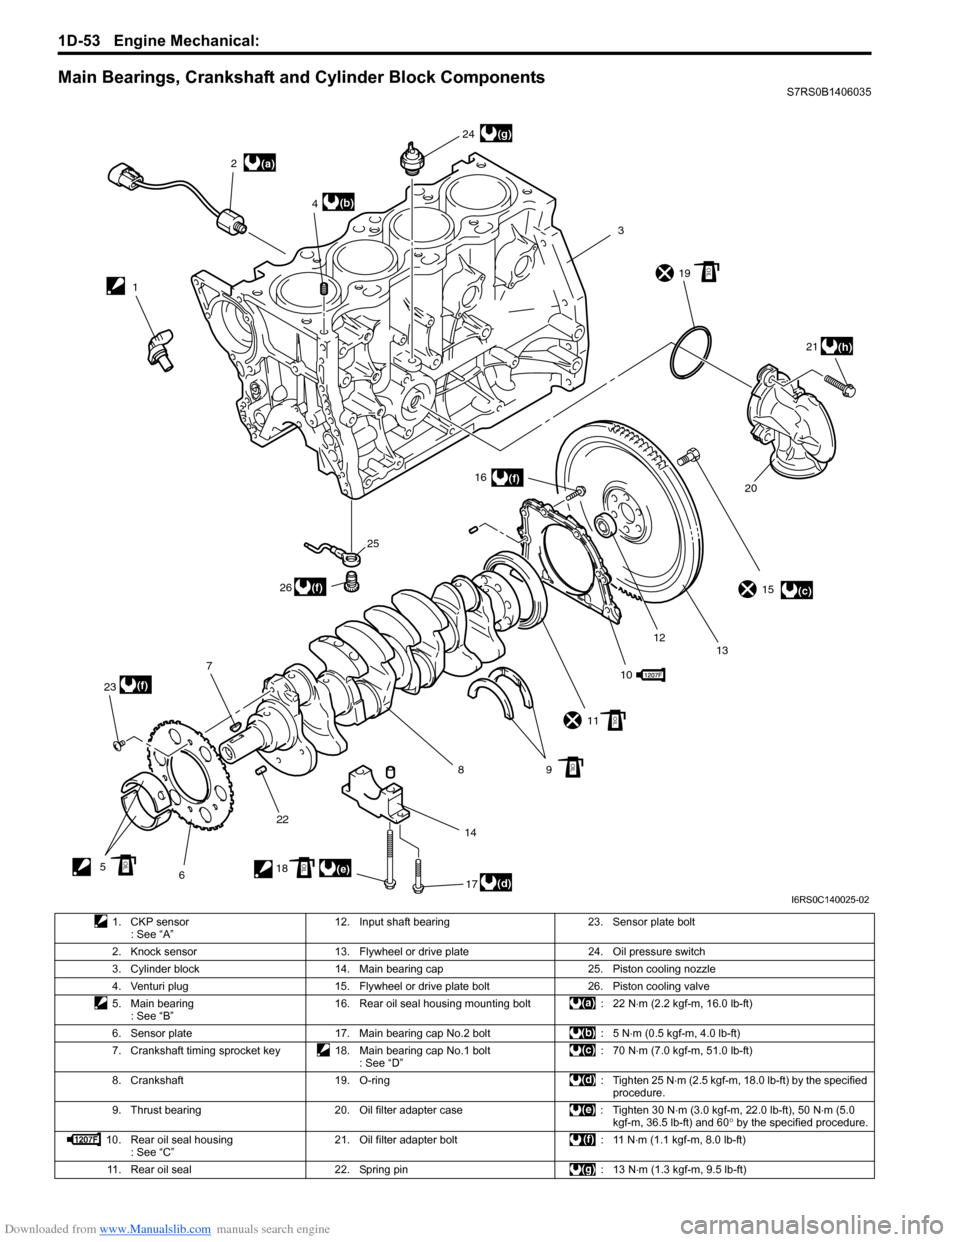 SUZUKI SWIFT 2008 2.G Service User Guide Downloaded from www.Manualslib.com manuals search engine 1D-53 Engine Mechanical: 
Main Bearings, Crankshaft and Cylinder Block ComponentsS7RS0B1406035
(a)
(c)
(d)(e)
(b)
(f)
(f)
(f)
(g)
(h)
12
3
4
5 